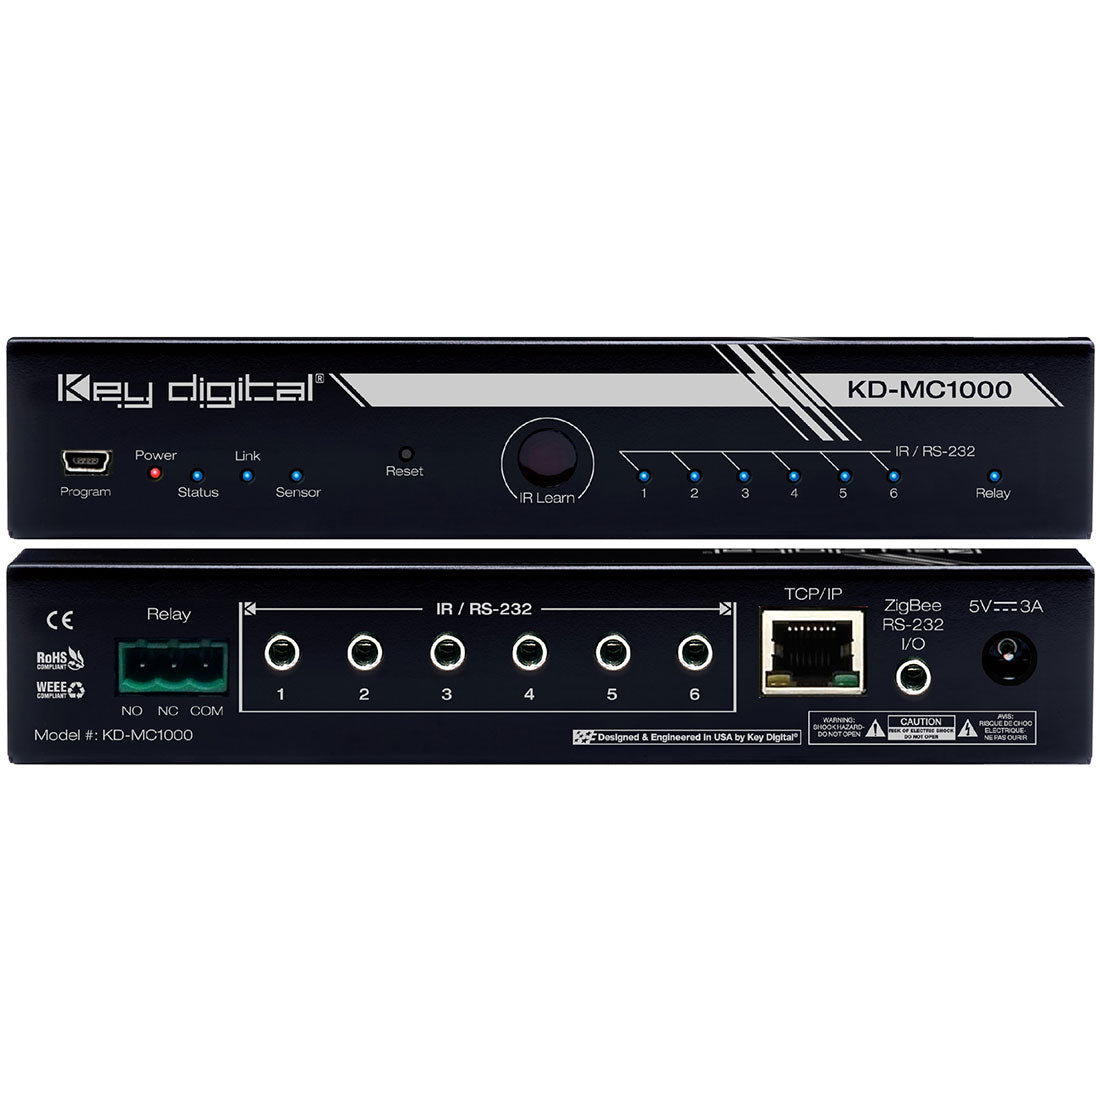 Key Digital KDMC1000 Master Controller (Wired/LAN, Supports up to 8 Ports)